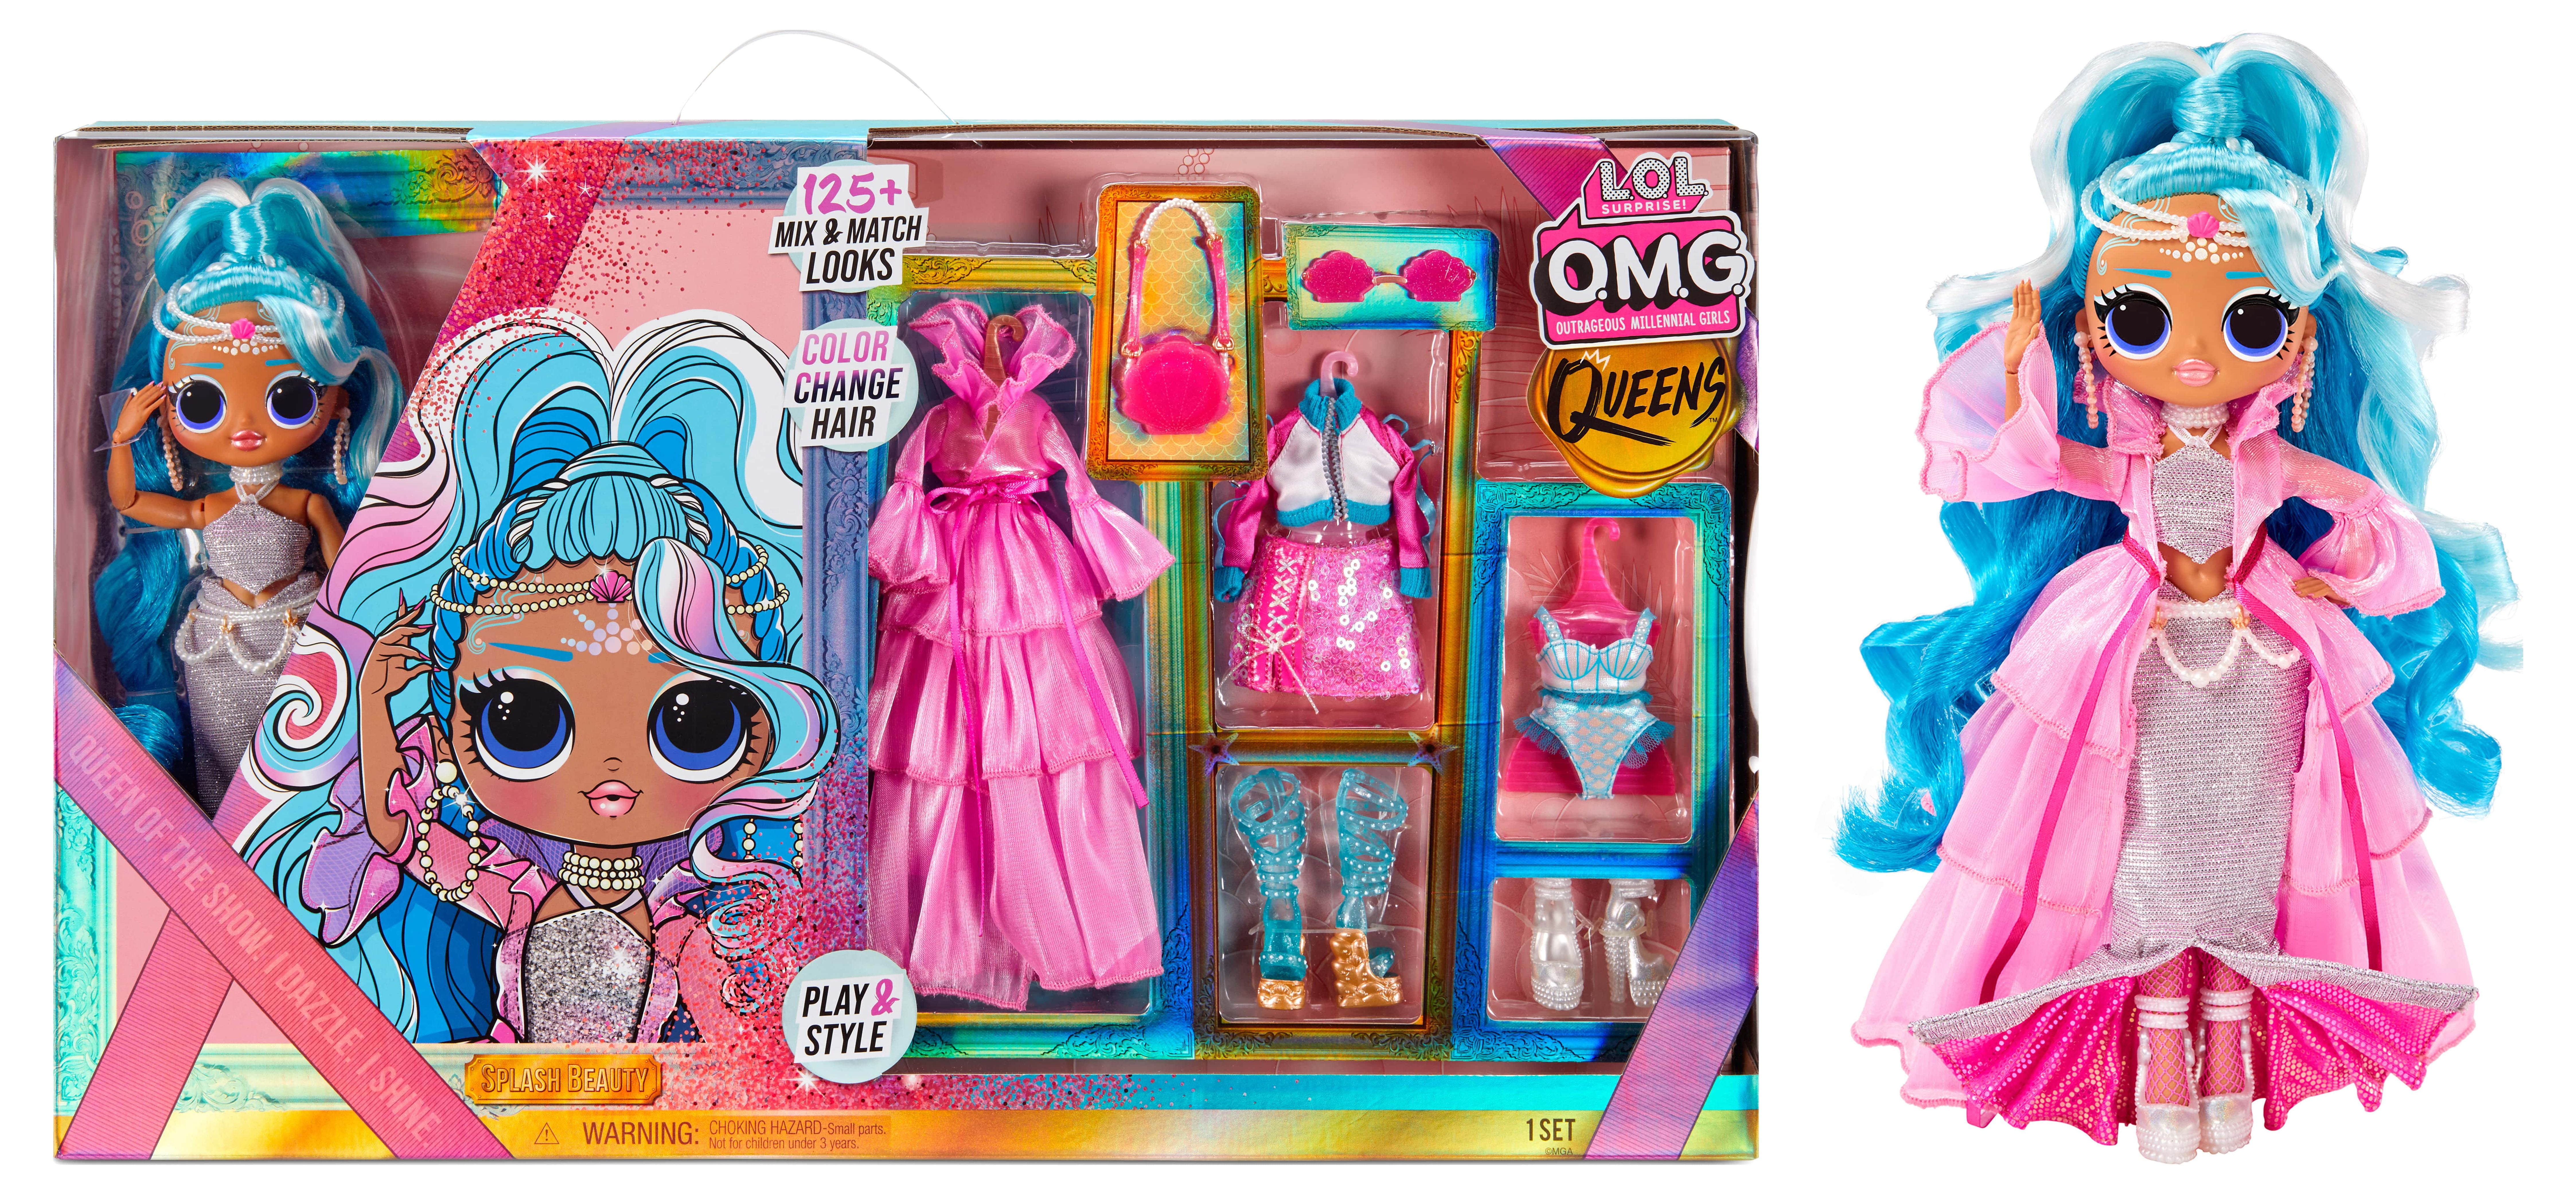  L.O.L. Surprise! OMG Movie Magic Fashion Dolls 2-Pack Tough  Dude and Pink Chick with 25 Surprises Including 4 Fashion Looks, 3D  Glasses, Accessories and Reusable Playset - Great Gift for Ages